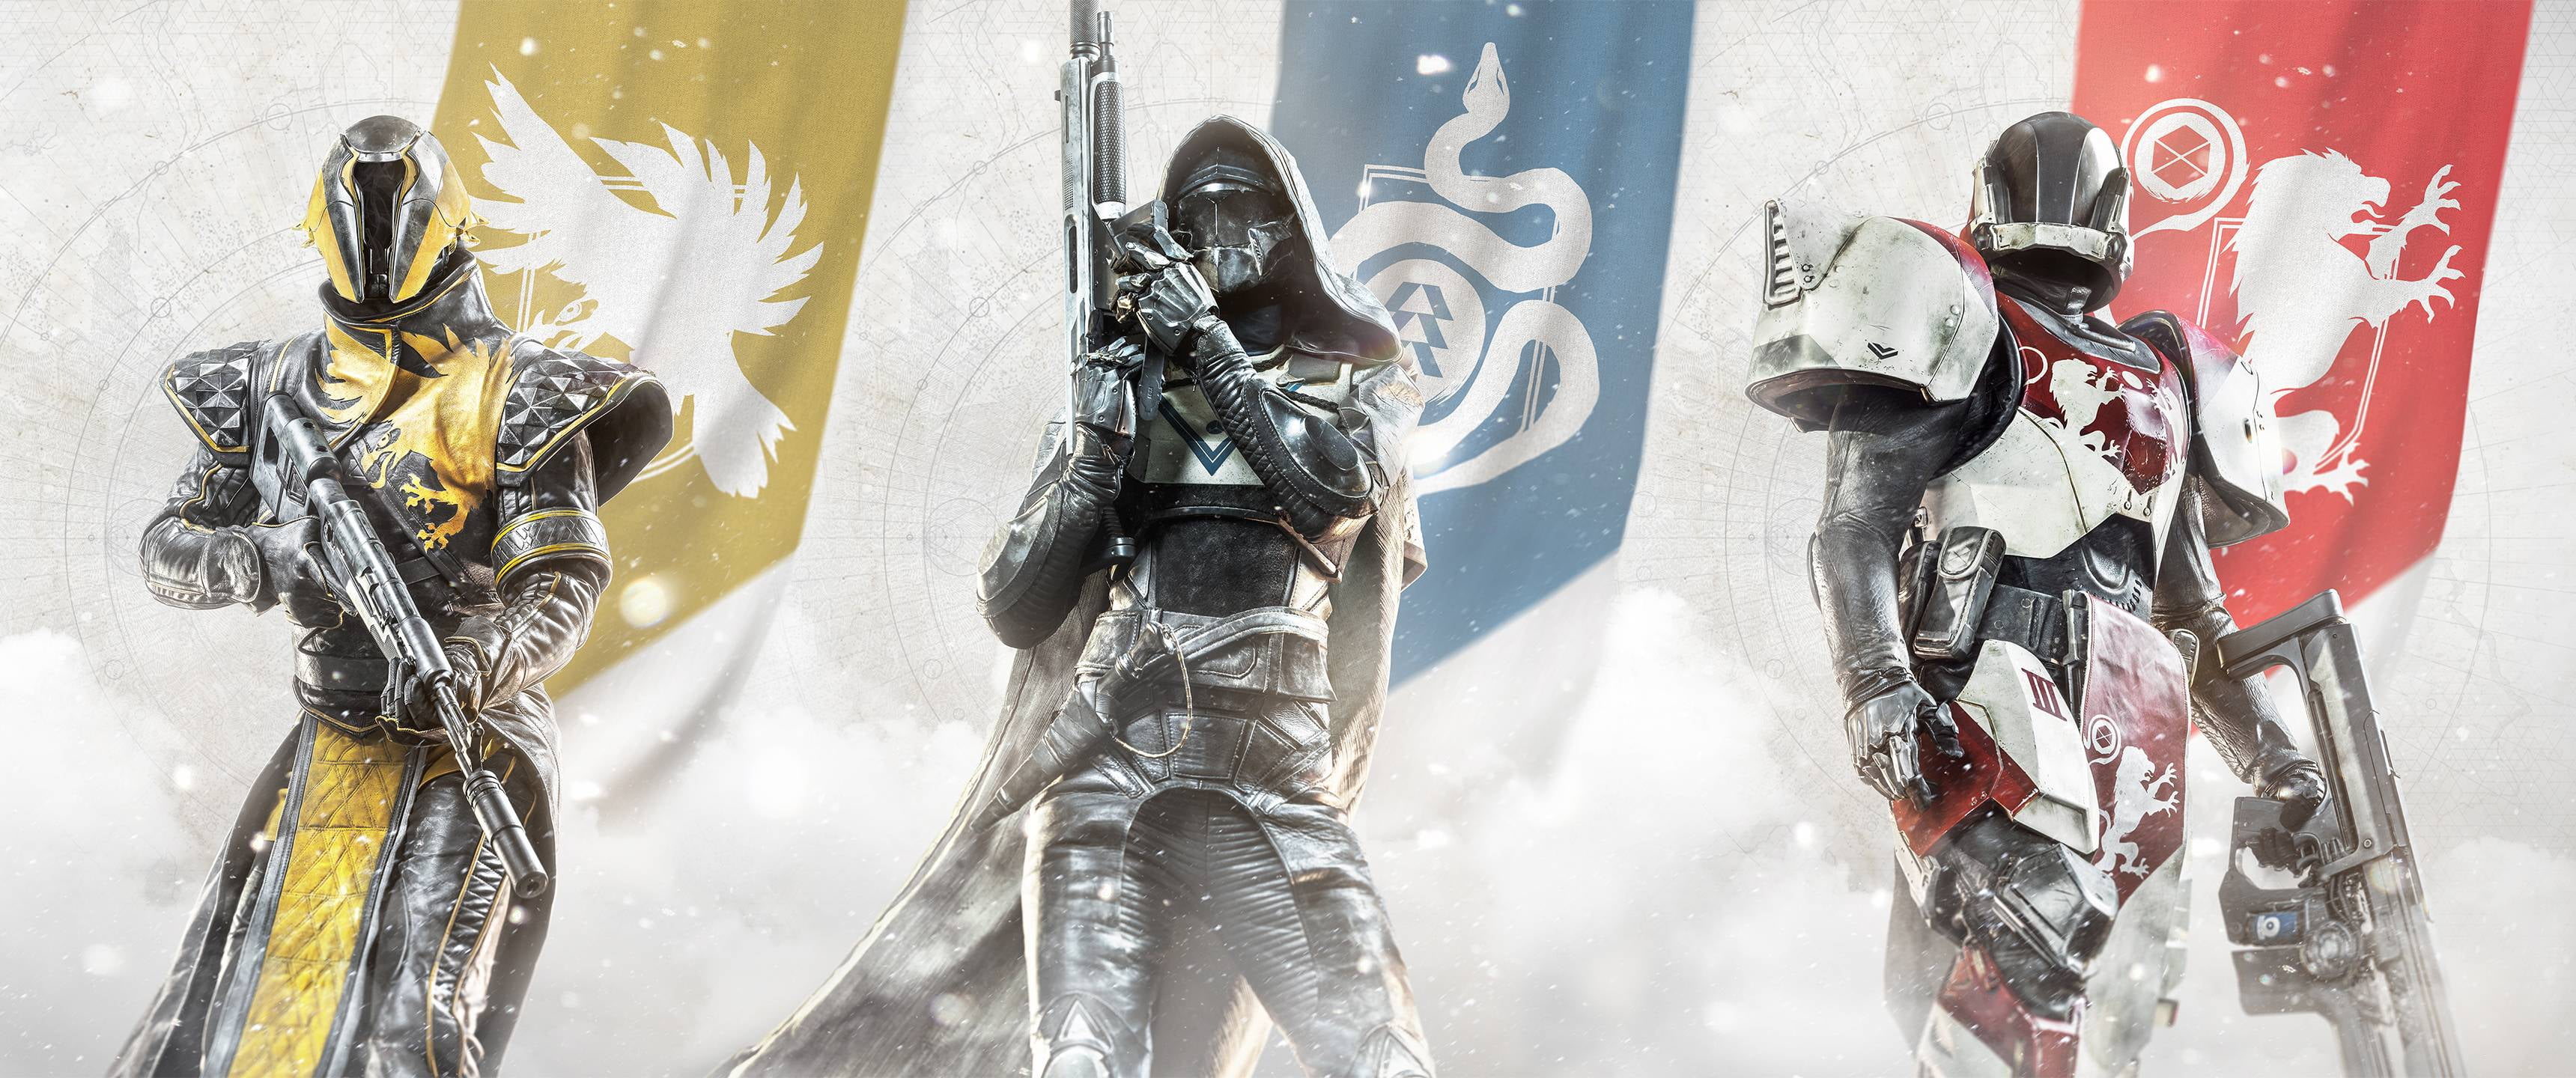 three characters with weapons wallpaper, Destiny 2, video games